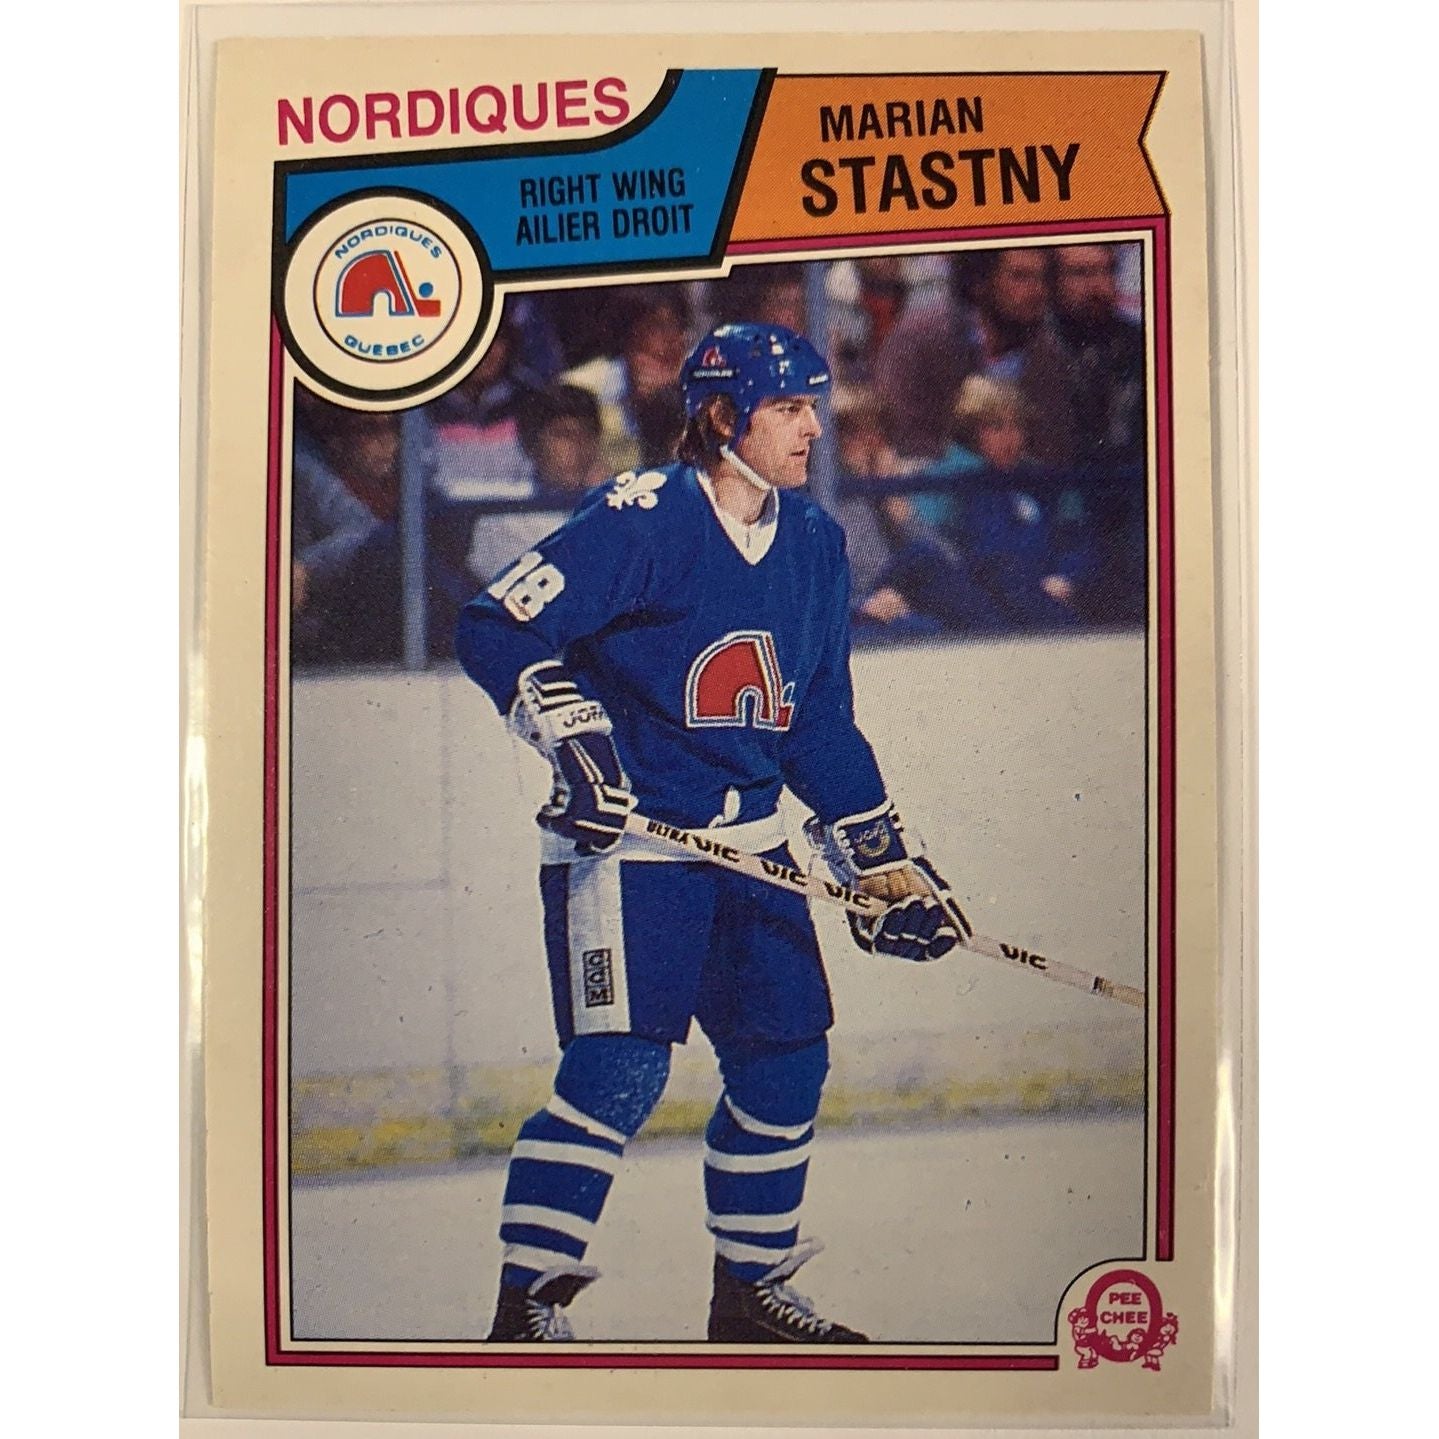  1983-84 O-Pee-Chee Marian Stastny  Local Legends Cards & Collectibles